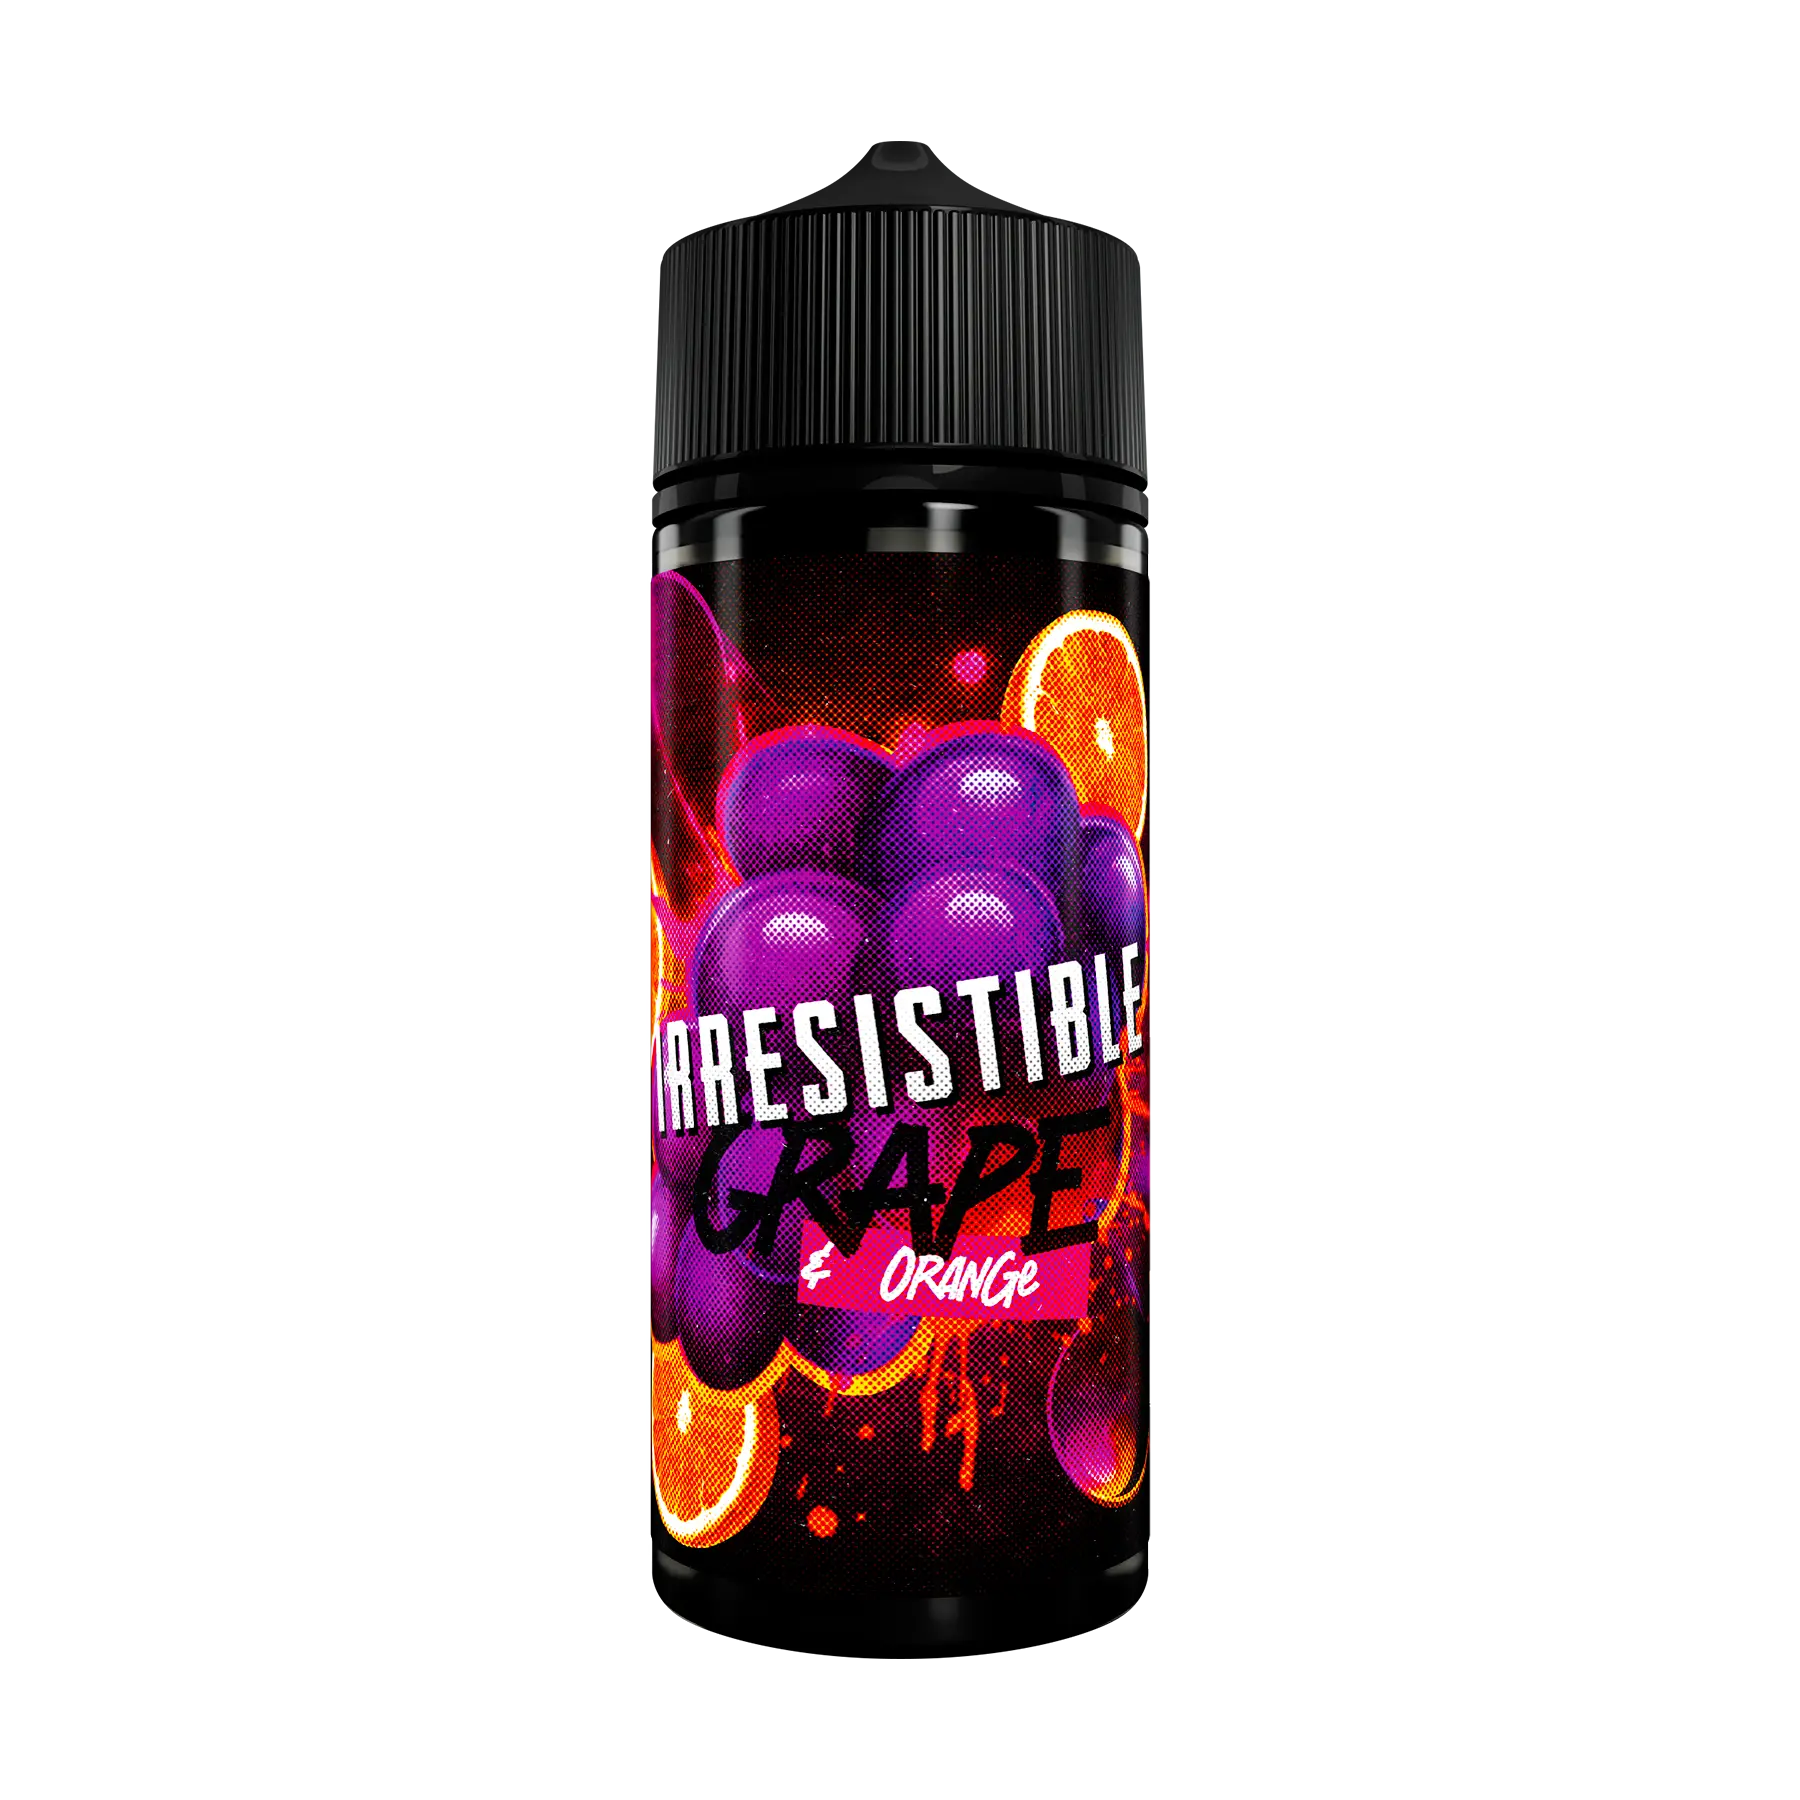 Irresistible Grape Orange combines the flavours of ripe oranges and sweet grapes for a satisfying vape. This e-liquid leaves a pleasant and fruity aftertaste.